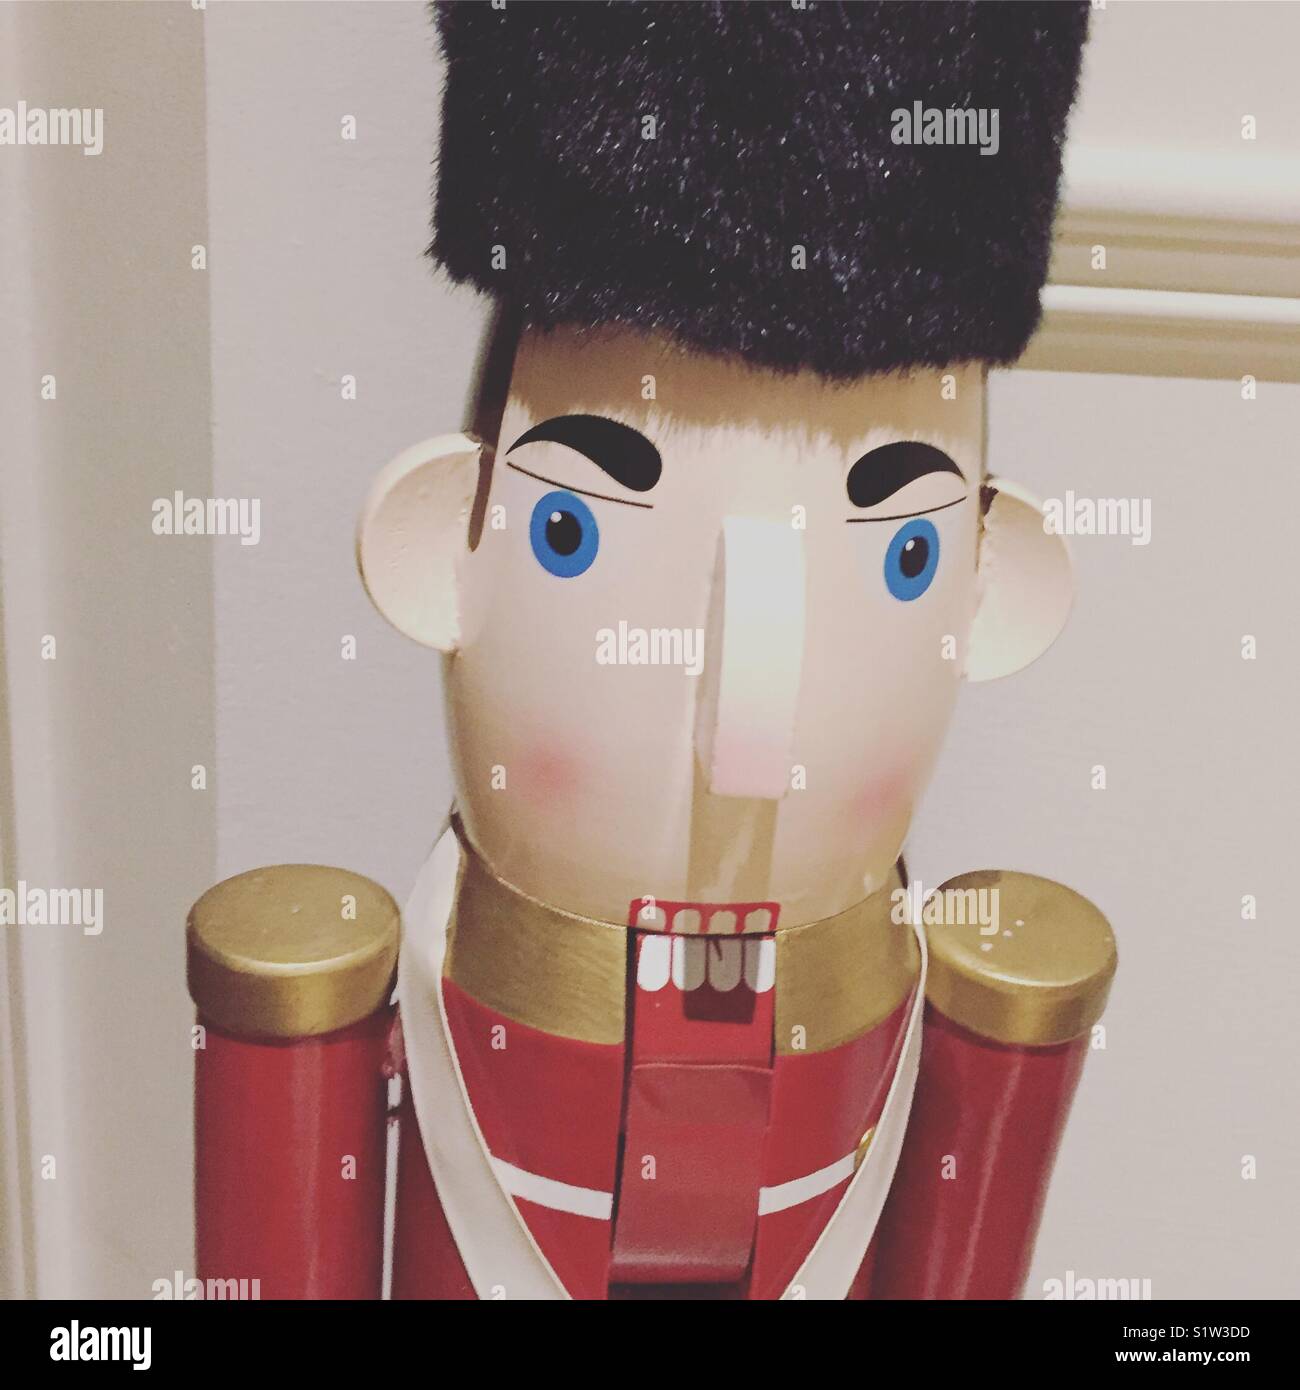 A nutcracker standing at guard by K.R. Stock Photo